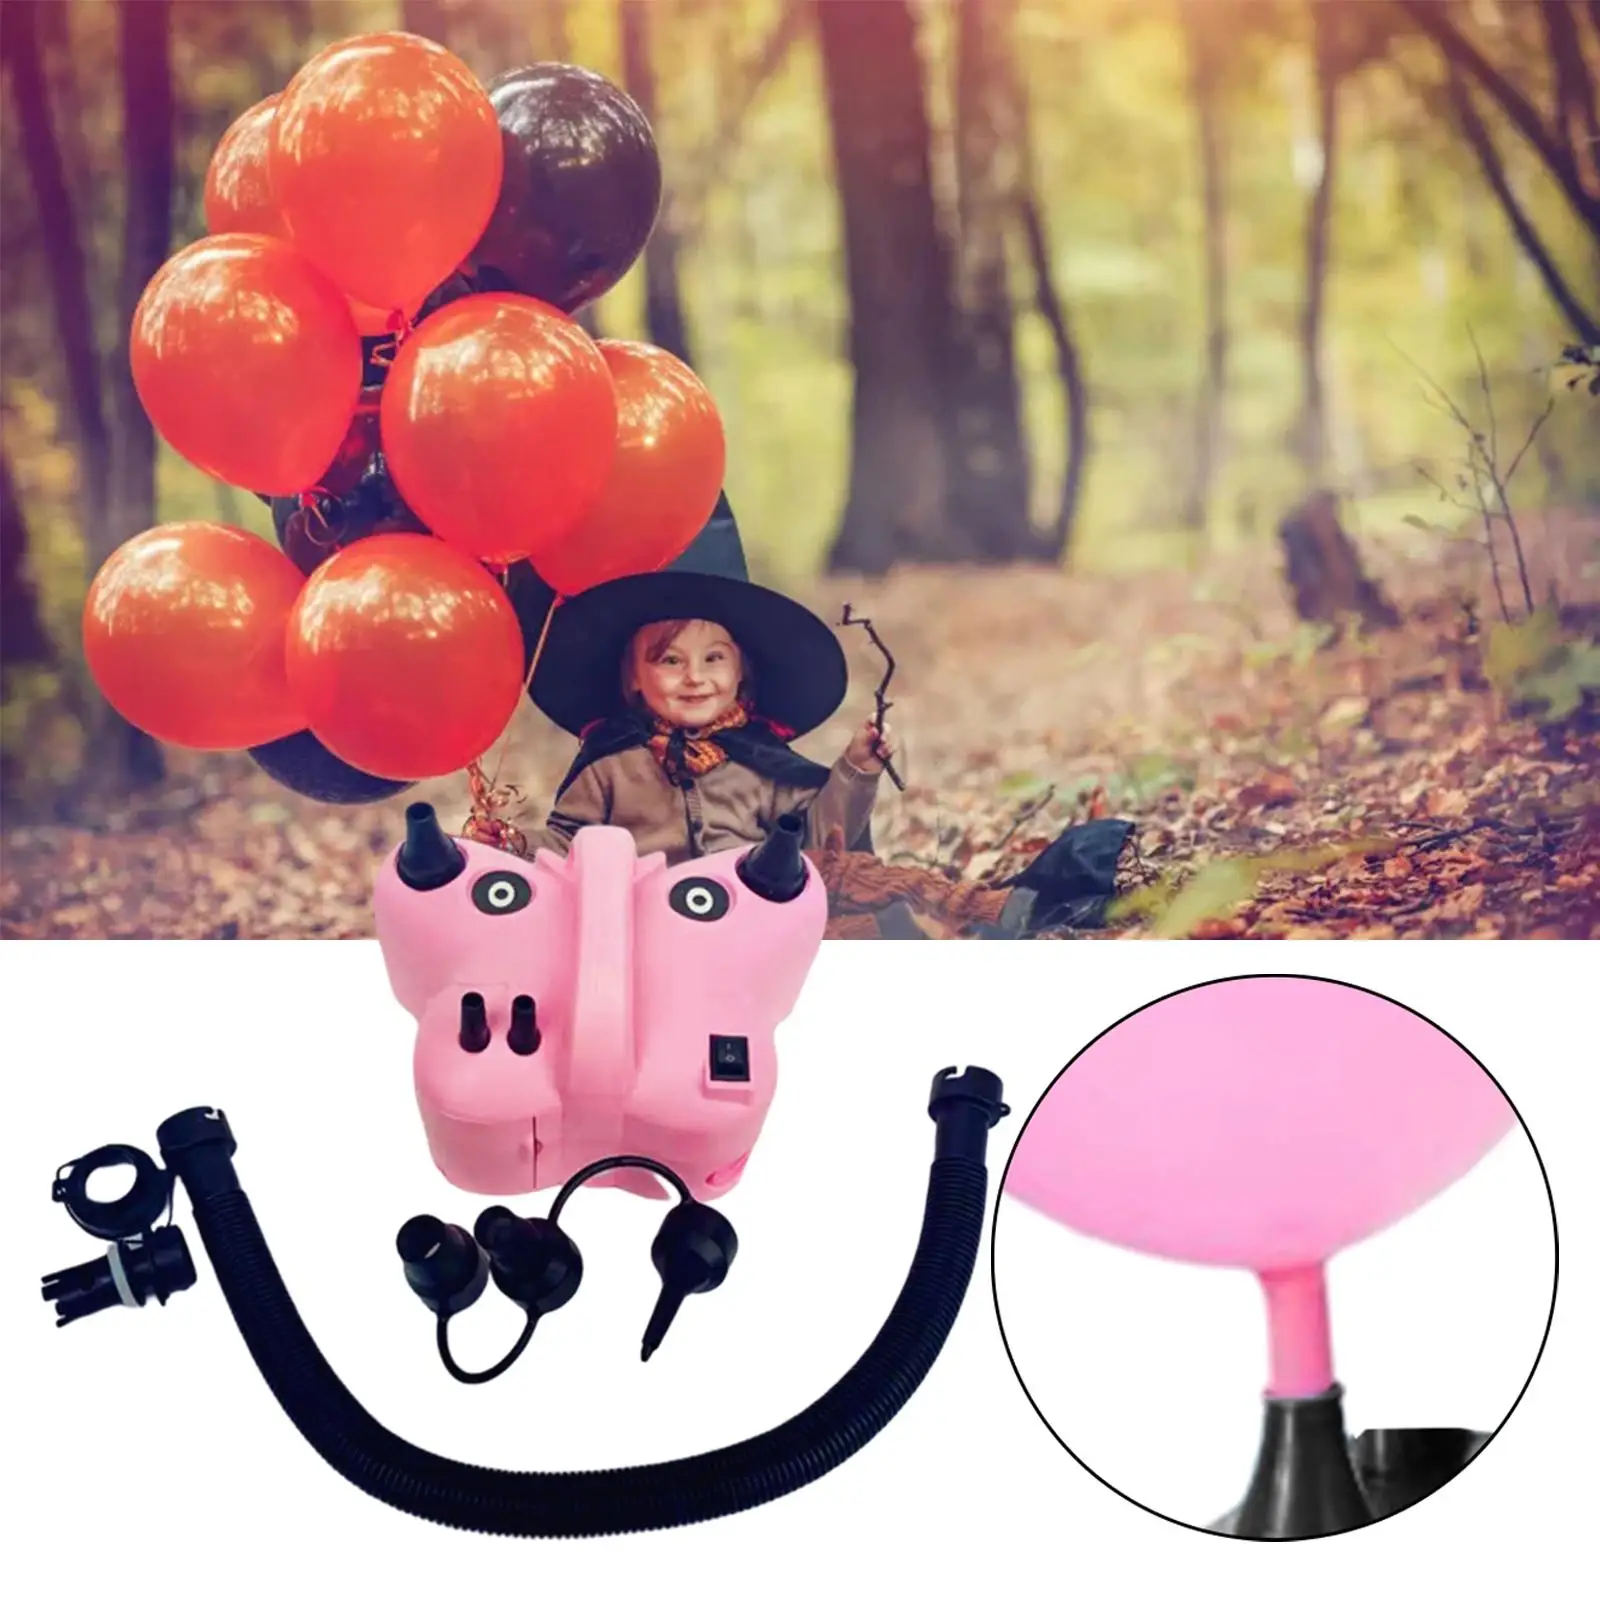 Portable Electric Balloon Inflator Pump Manual and Automatic Pumping Mode Fast and  Blower for Floating Tube Rubber Boat